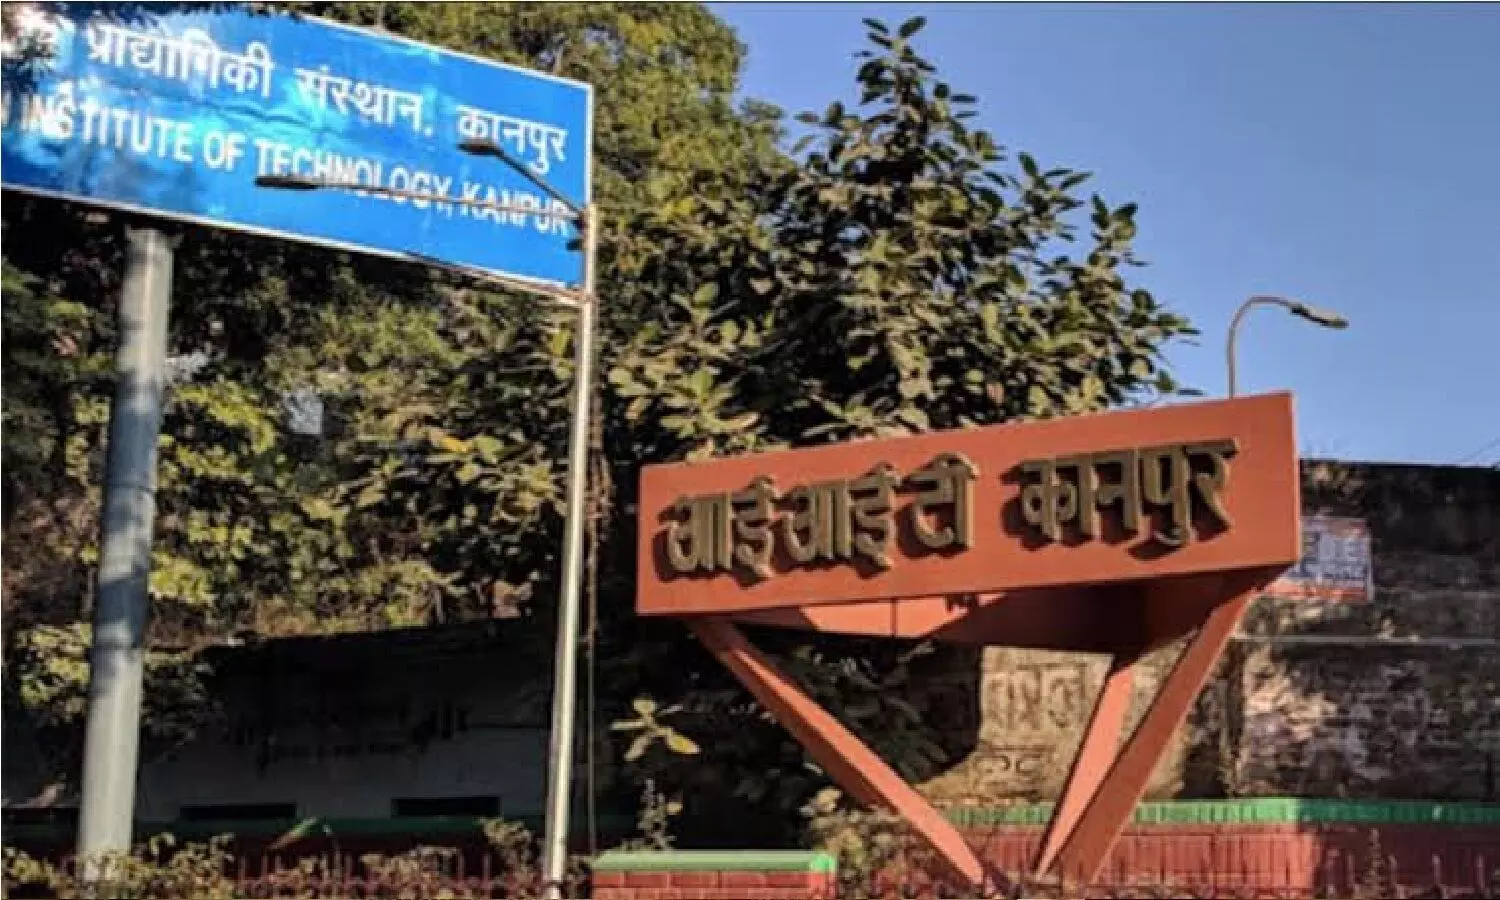 IIT Kanpur researcher suicide